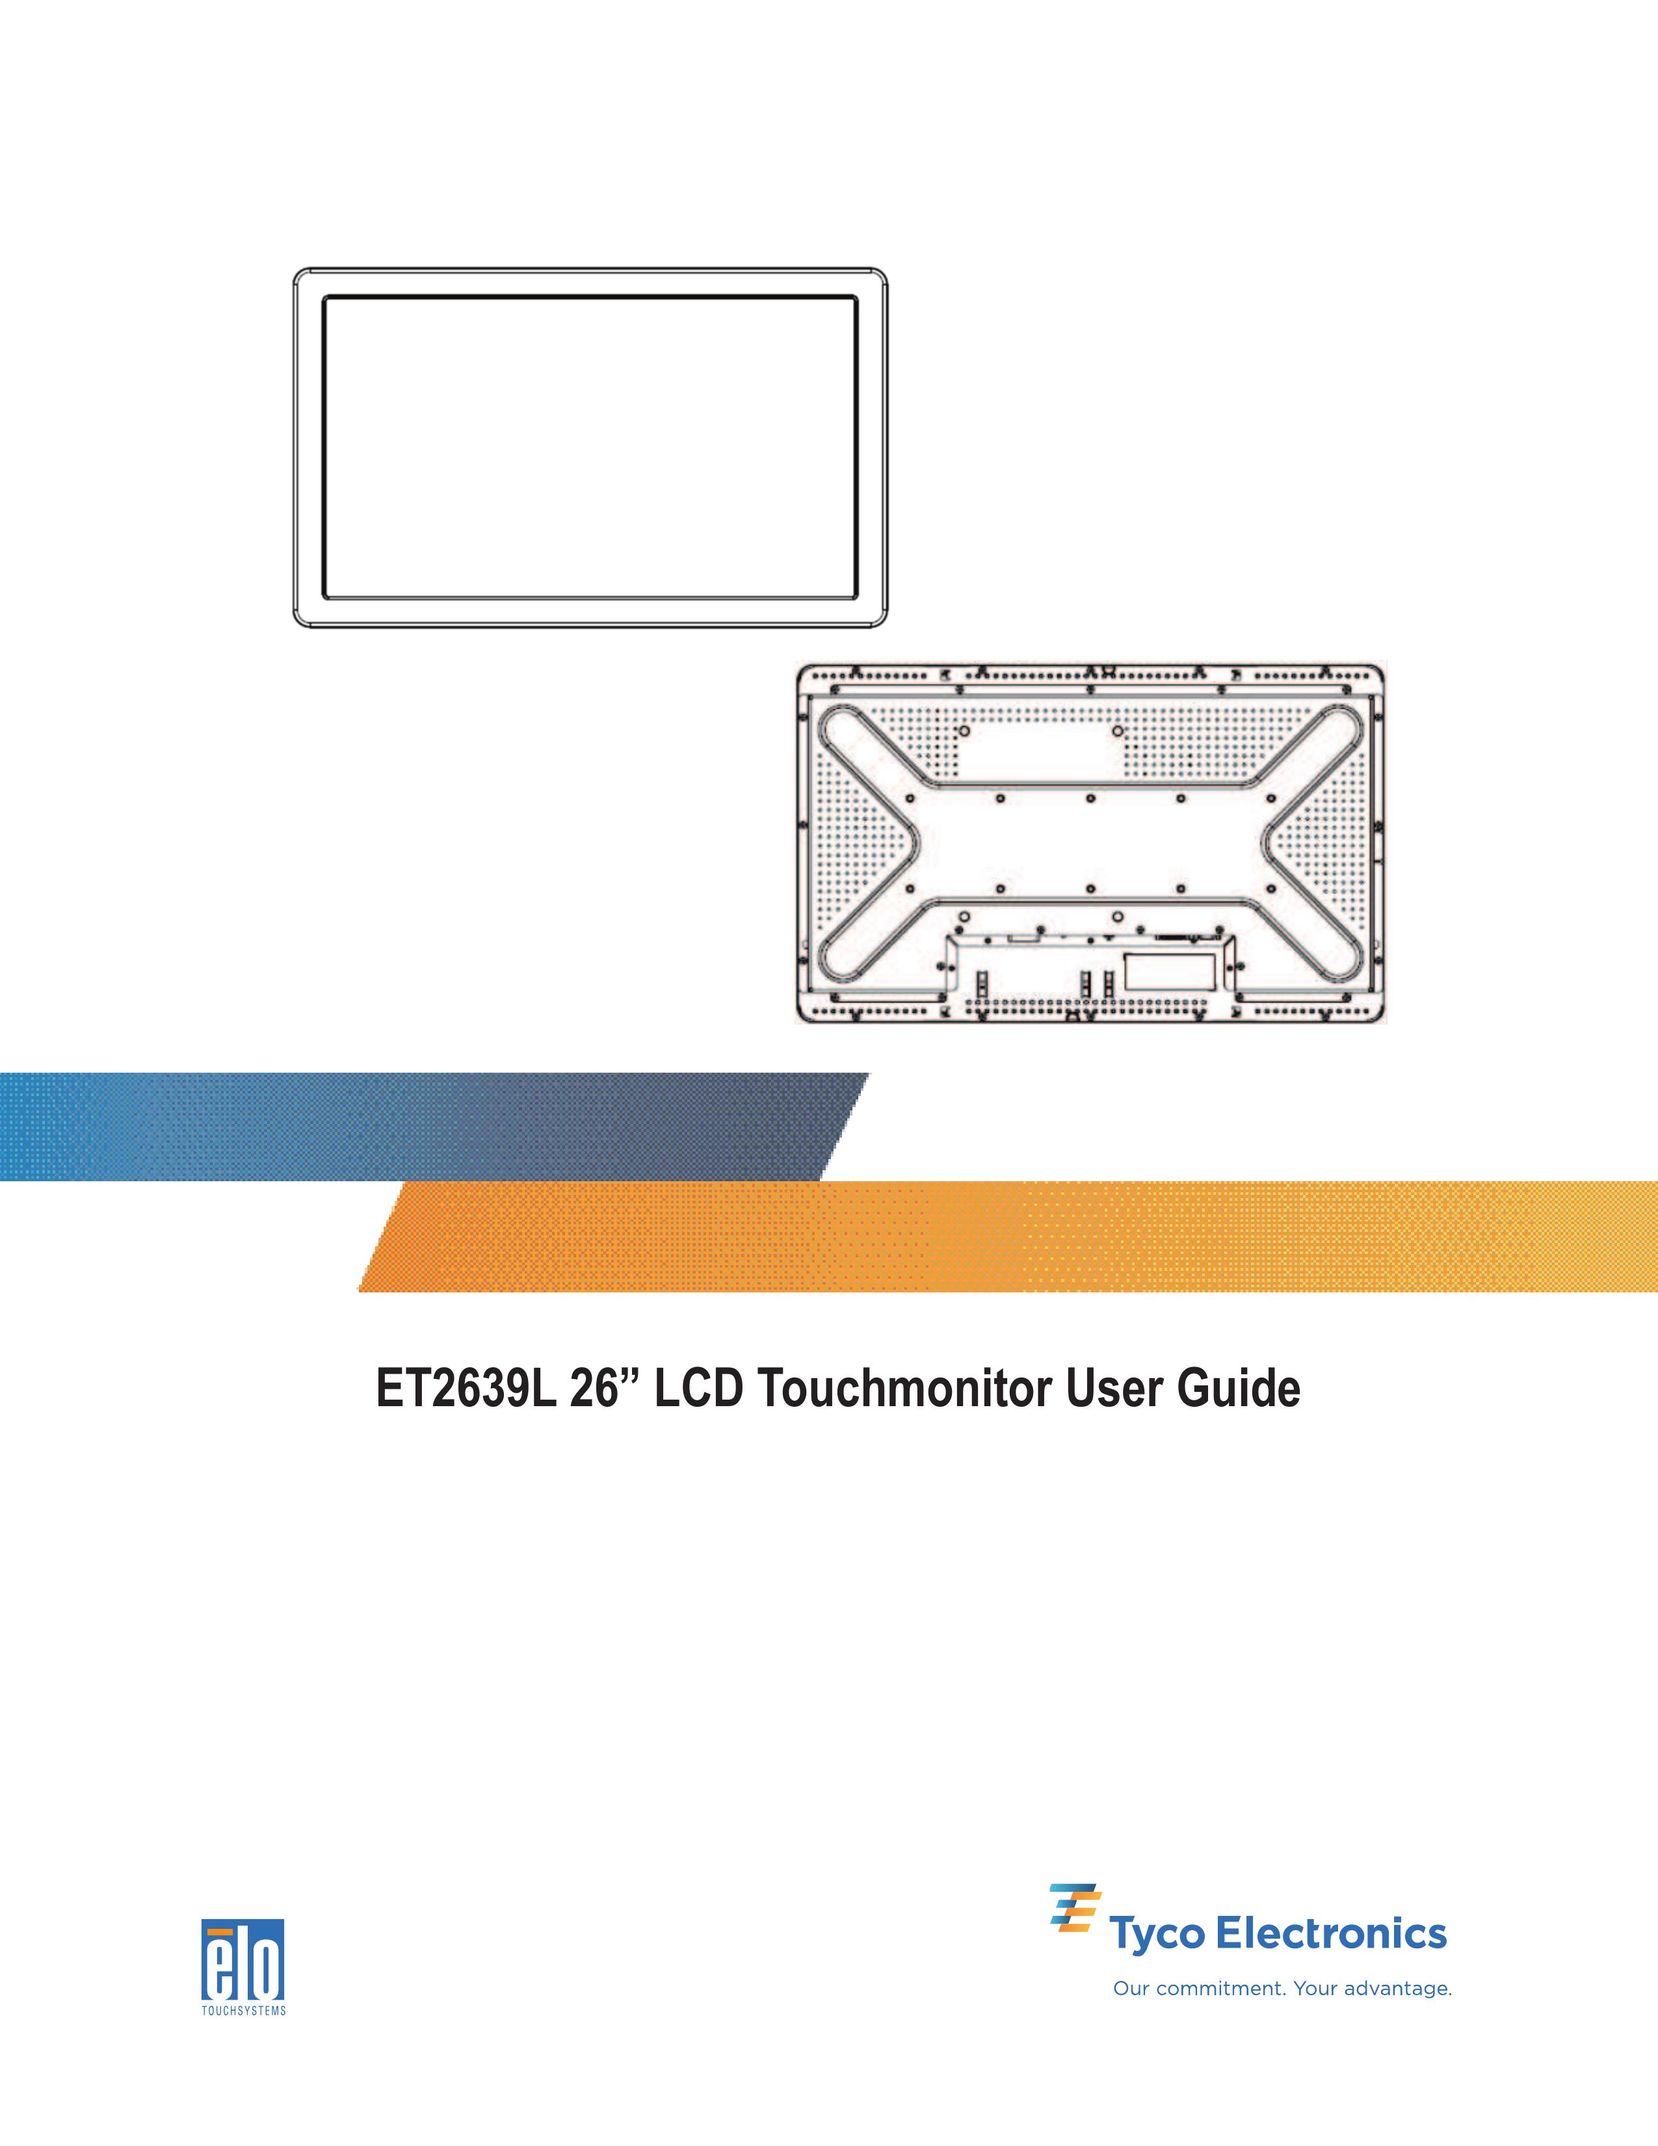 Tyco Electronics ET2639L Car Video System User Manual